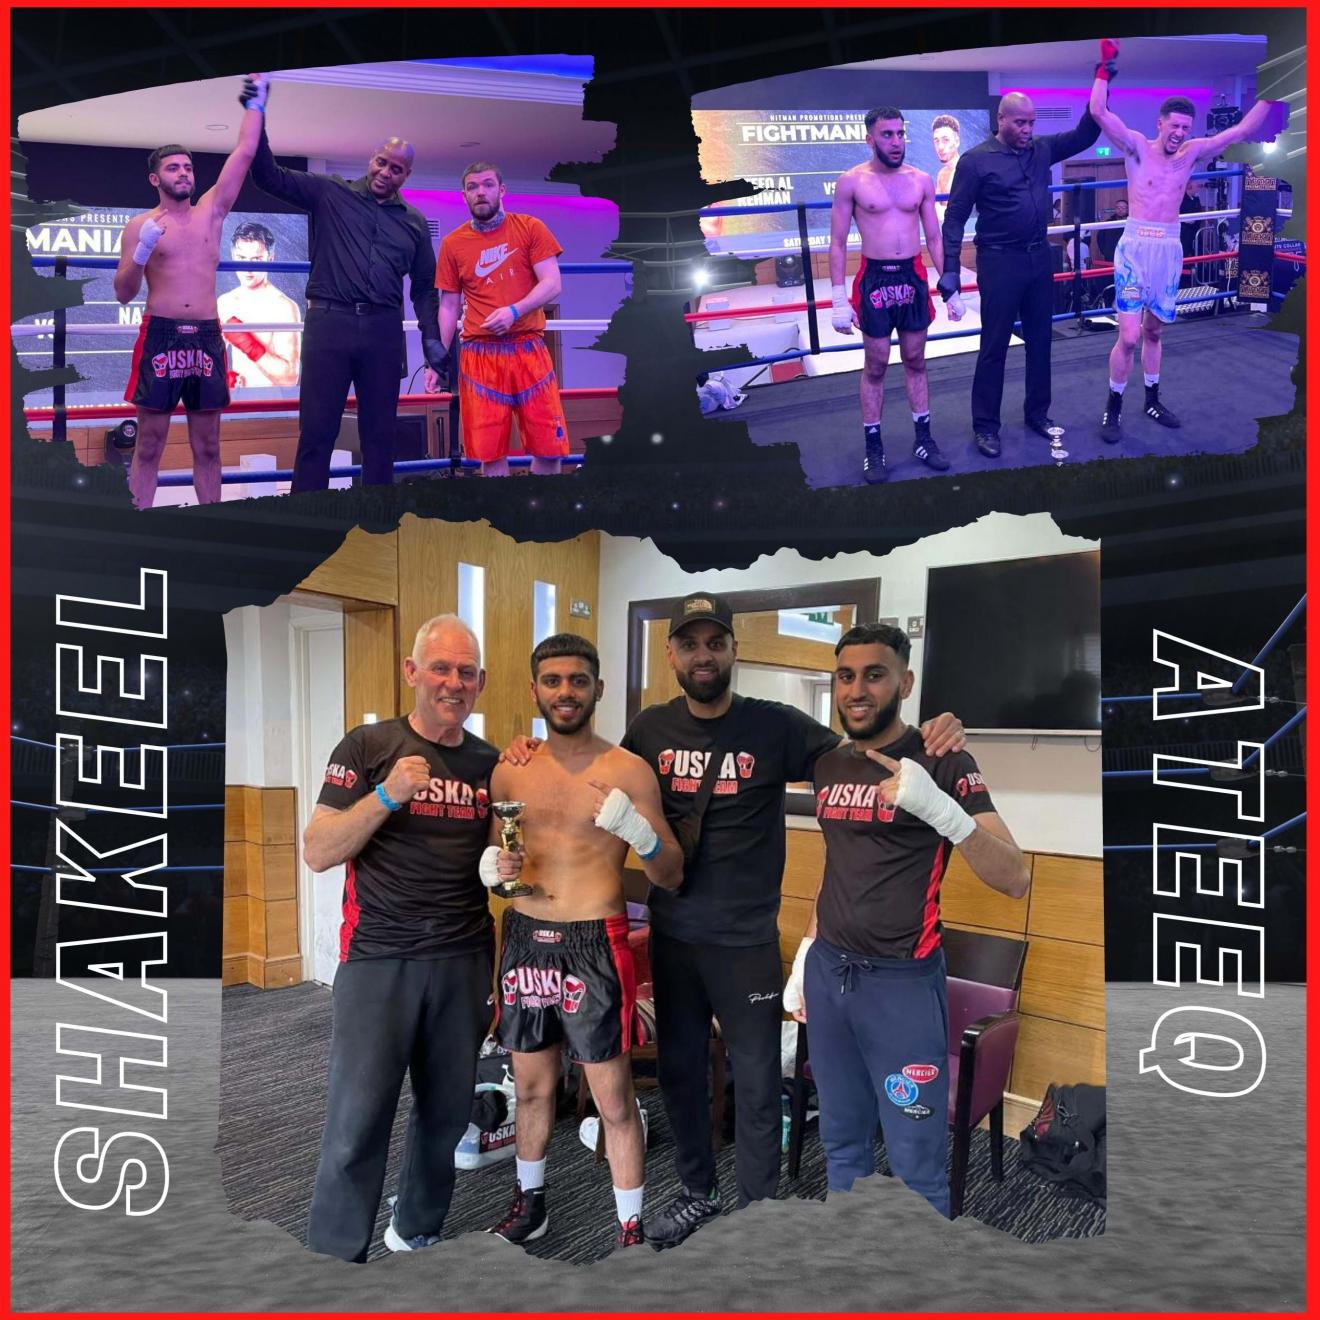 14-05-22 - Ateeq Al-Rehman and Shakeel Hussain do us proud Boxing on Fightmania 12!